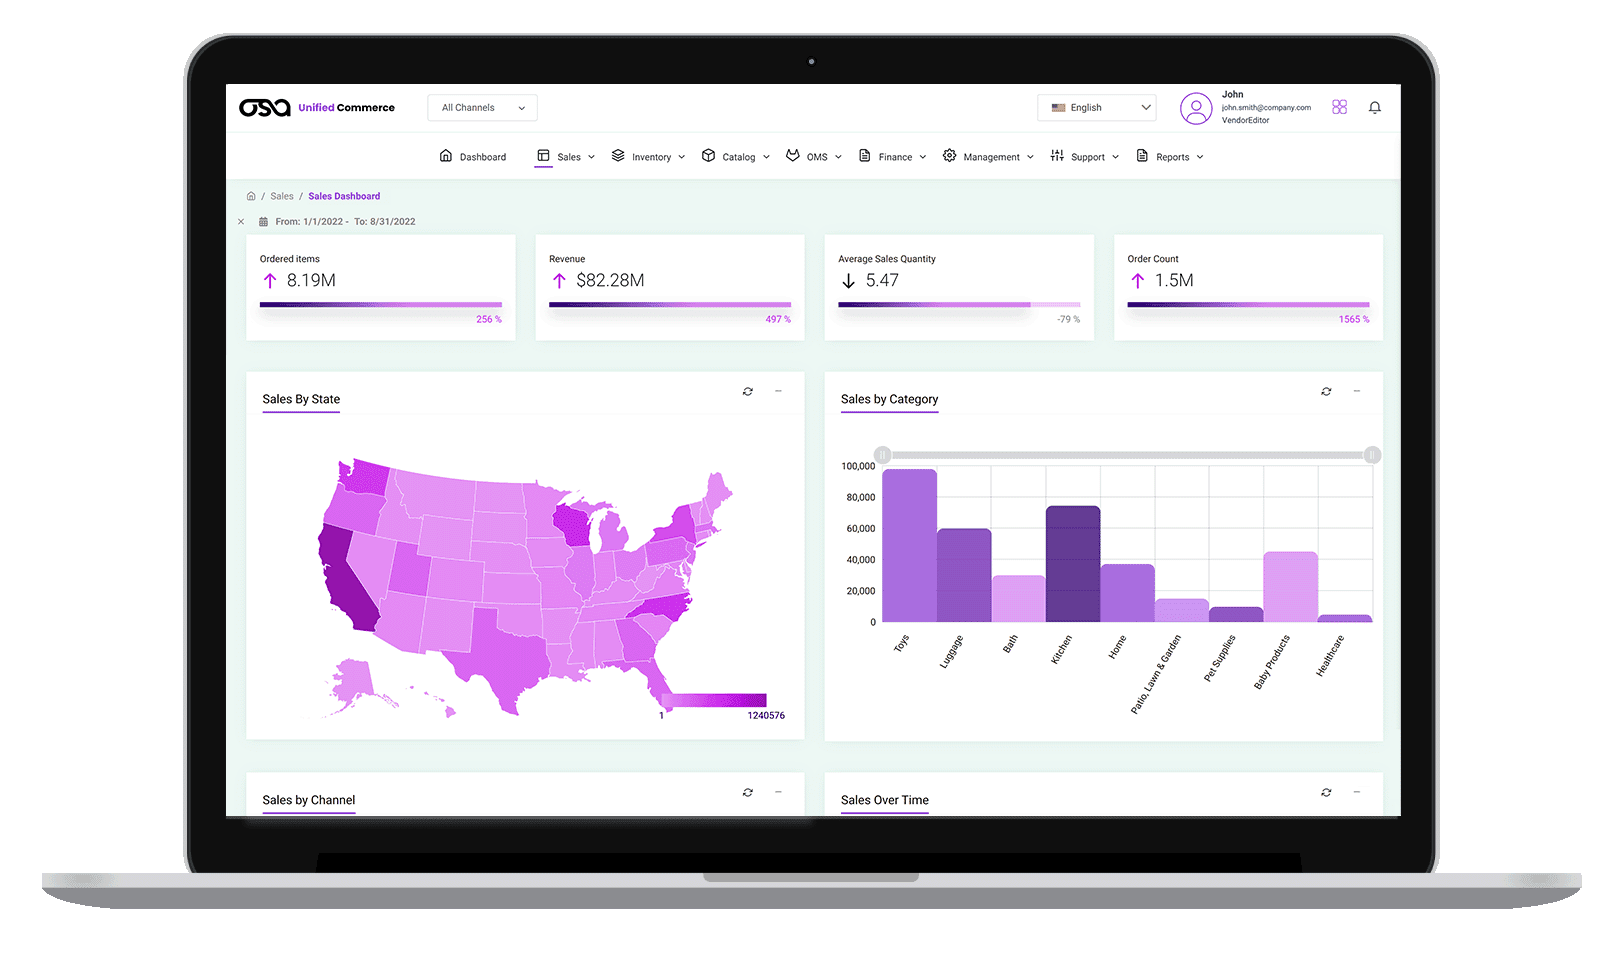 Stop guessing and making assumptions about your data. Gain insights into revenue, orders, expenses, and more to forecast supply chain sales by source.